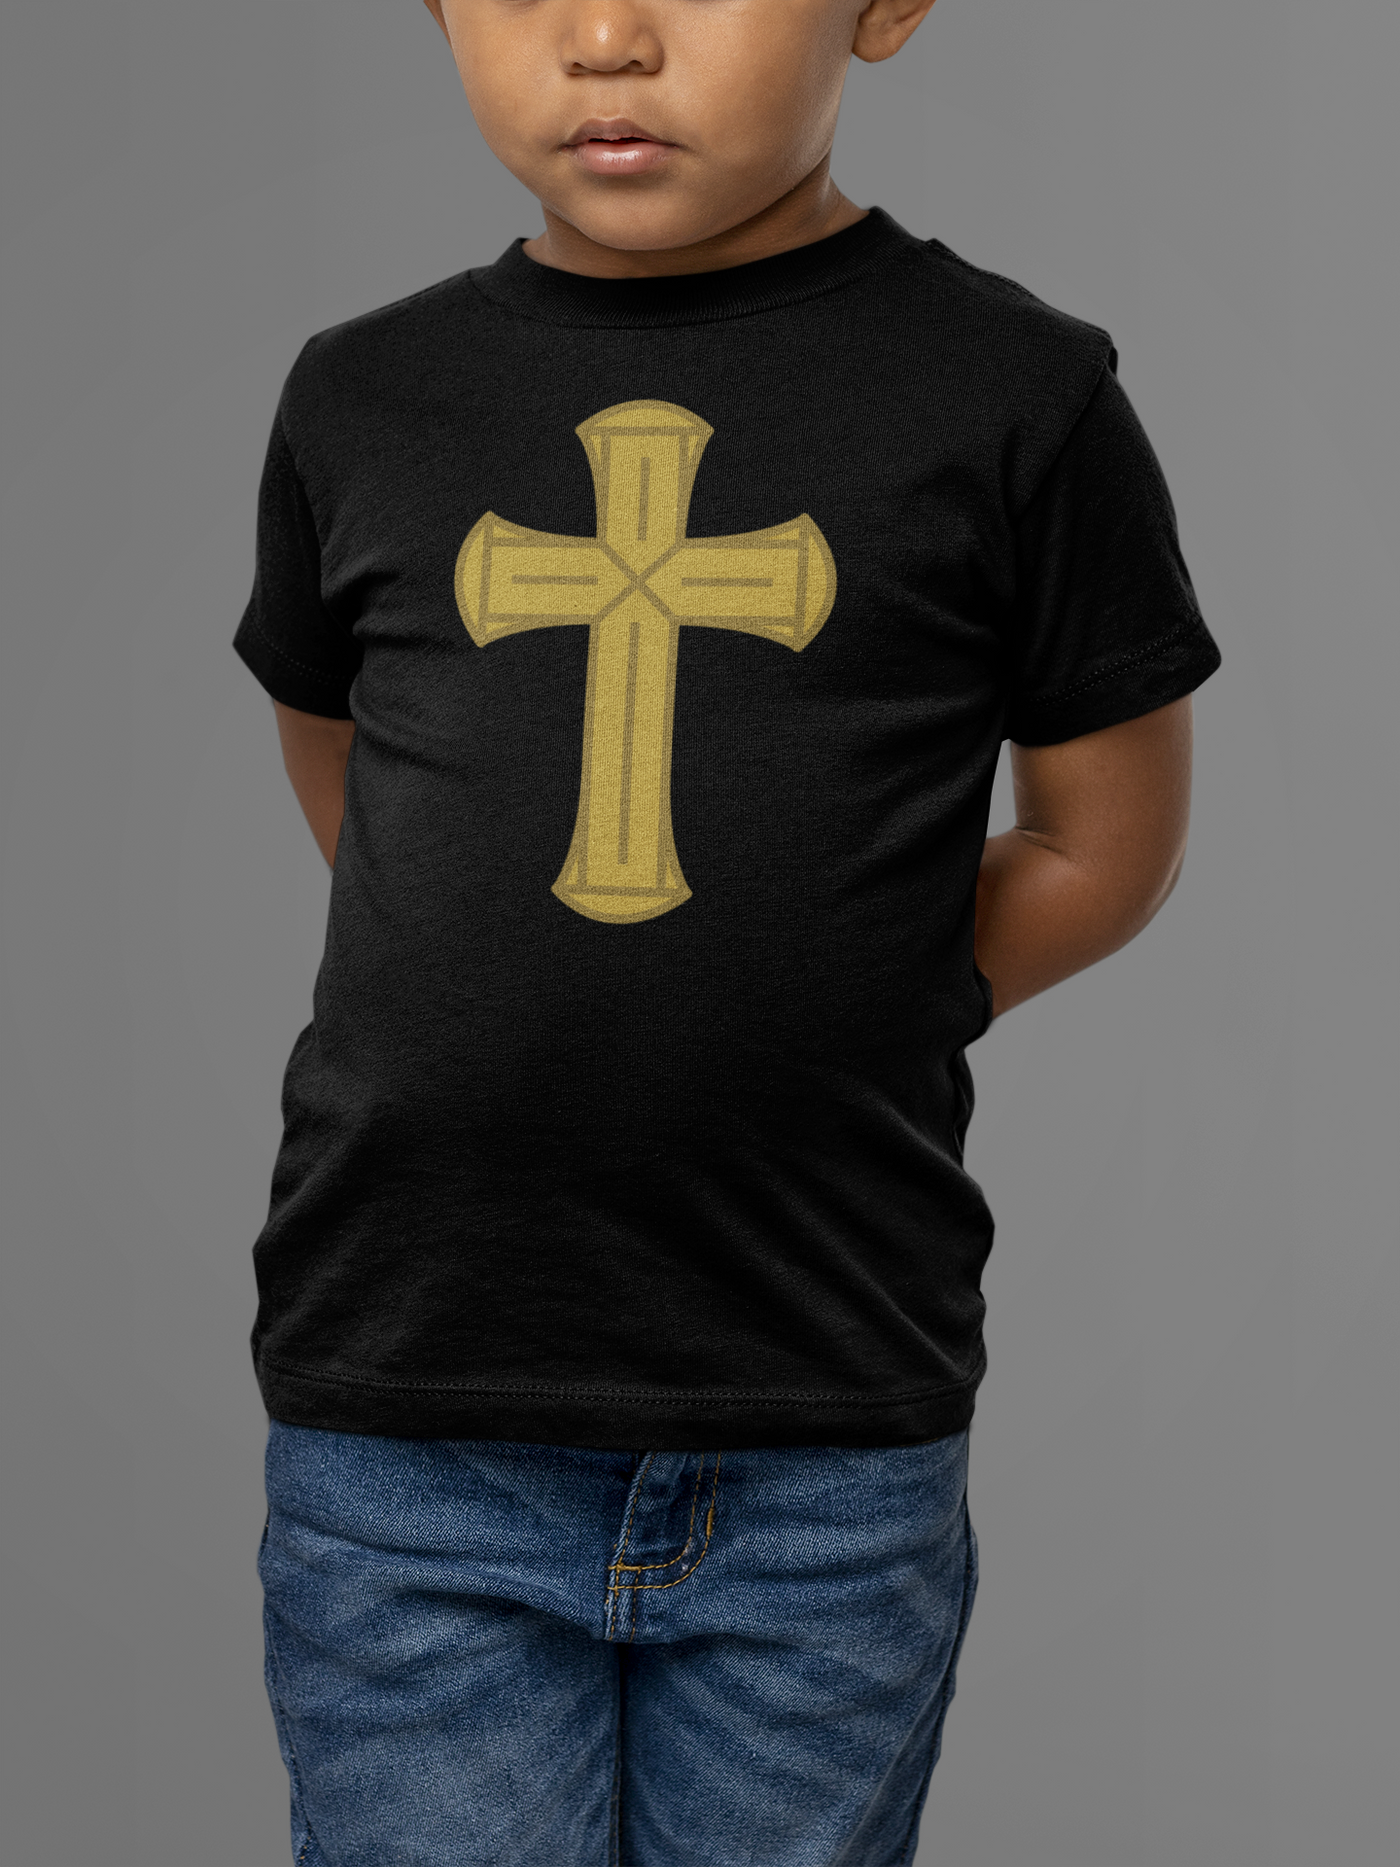 F&H Christian Gold Cross Toddler Short Sleeve Tee - Faith and Happiness Store